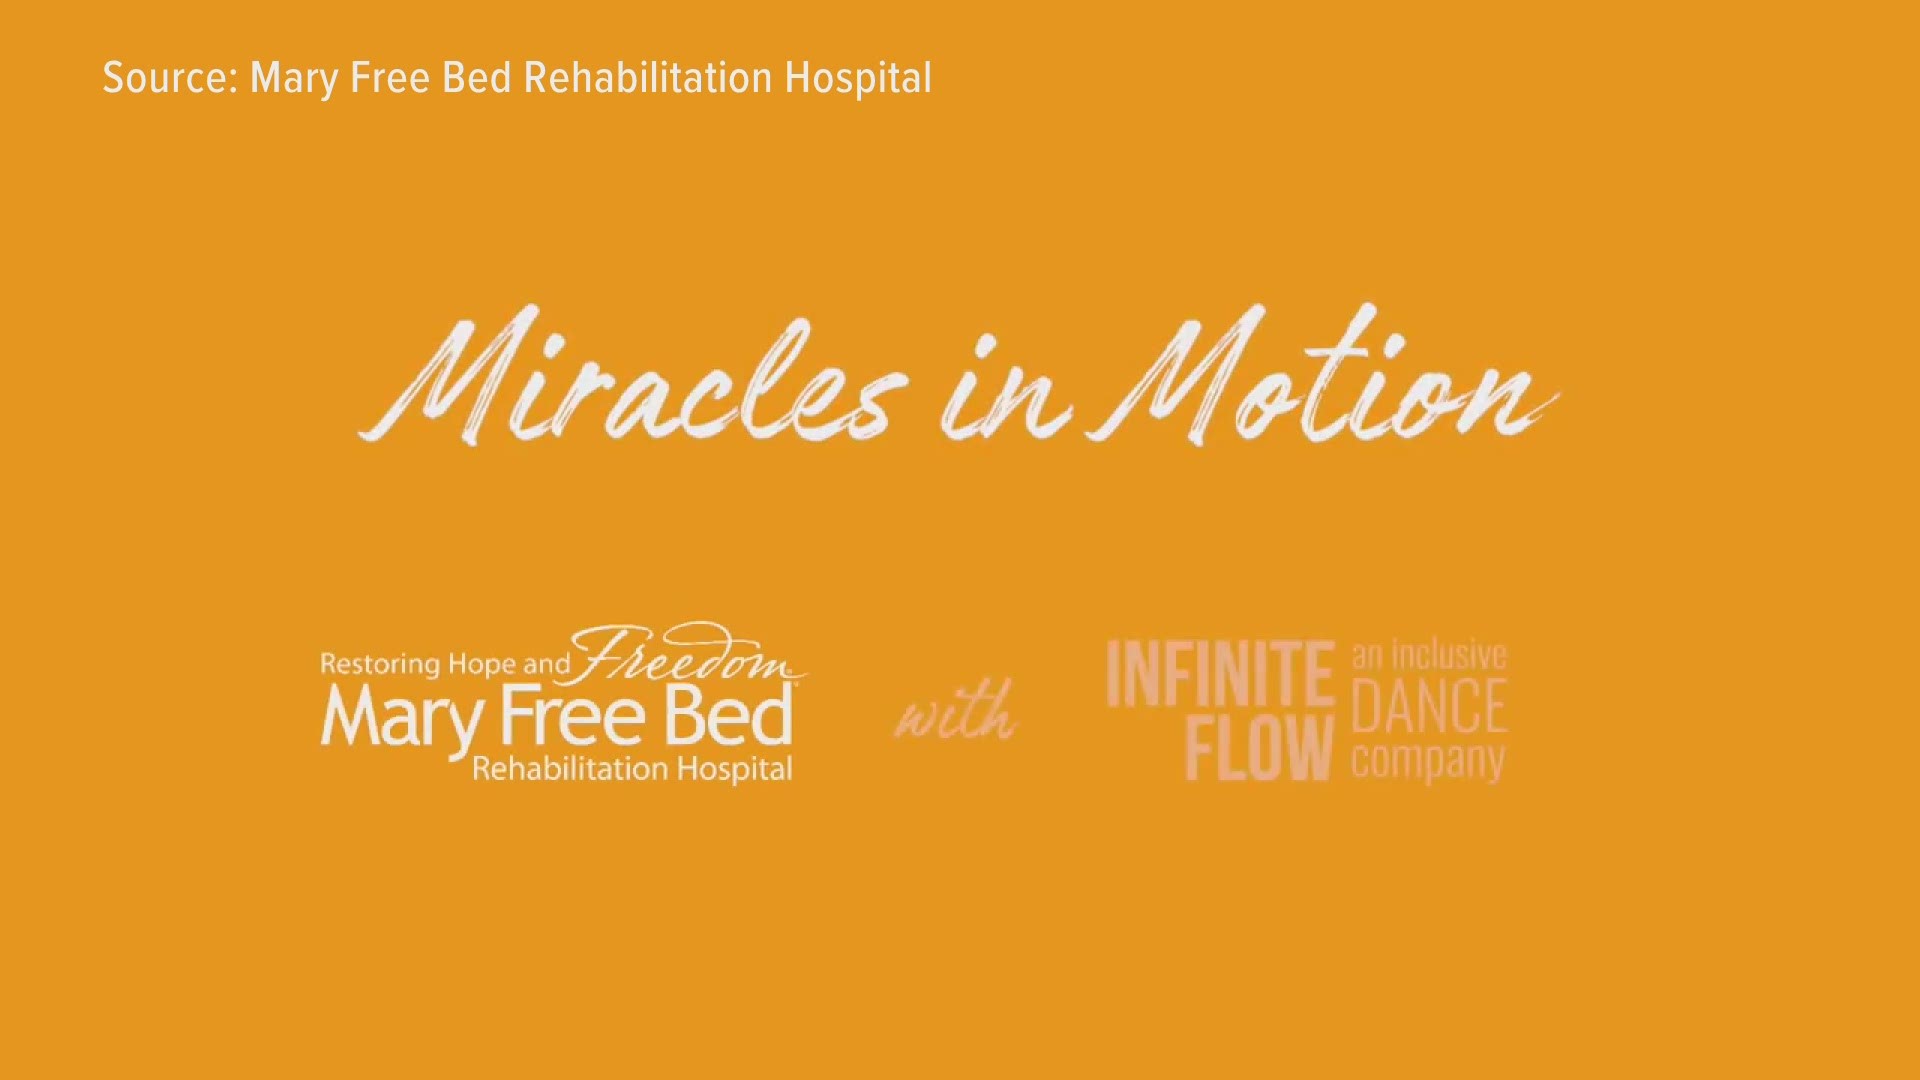 "Miracles in Motion" is the first inclusive dance video created by a rehabilitation hospital. Vote: #68643 in ArtPrize. Learn more at: maryfreebed.com/dance. Courtesy: Mary Free Bed Rehabilitation Hospital